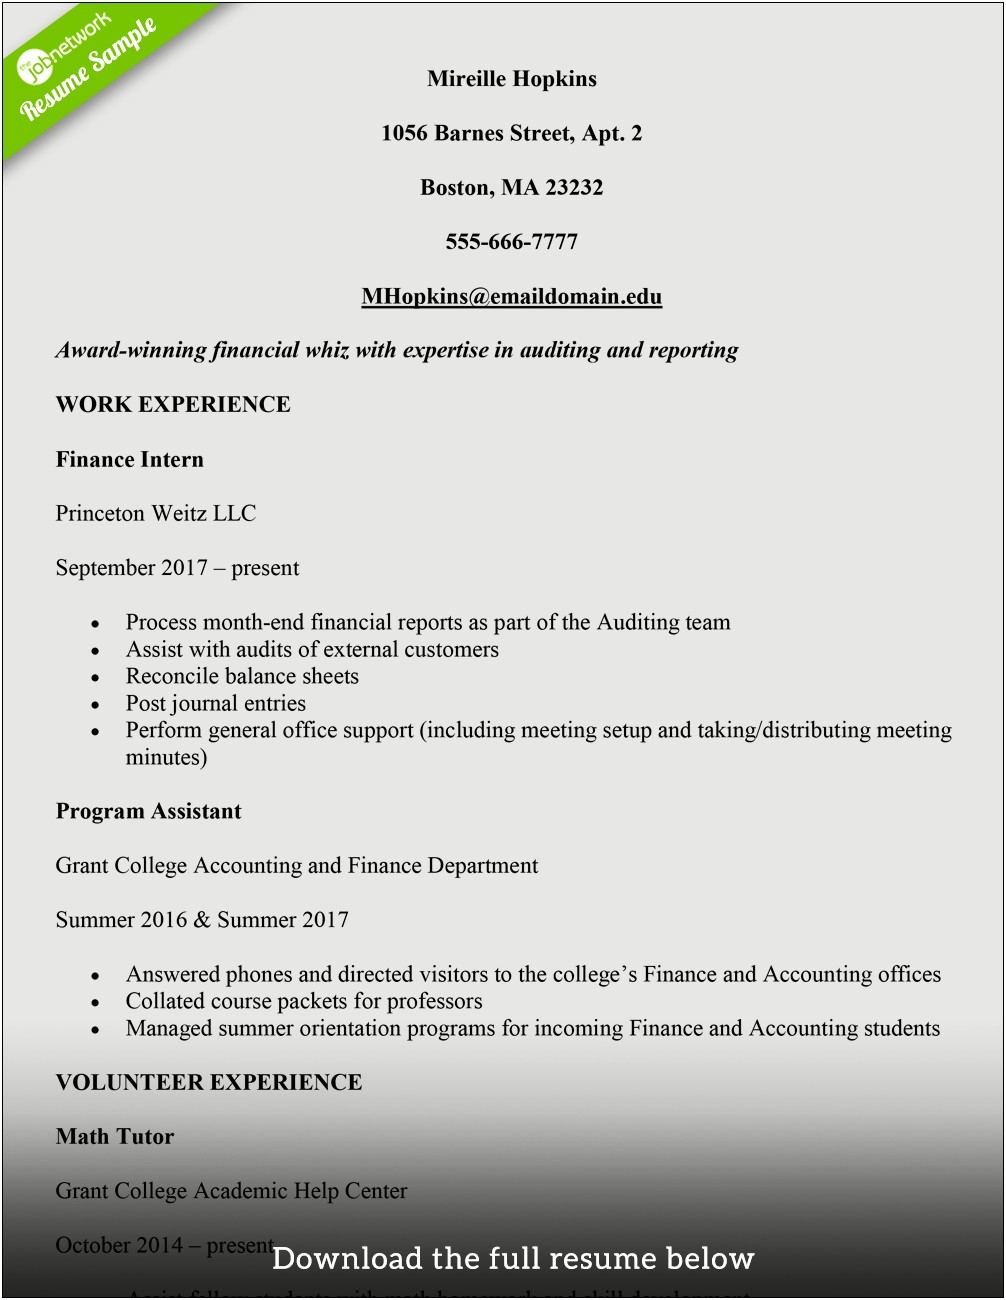 Resume Template For A College Freshman